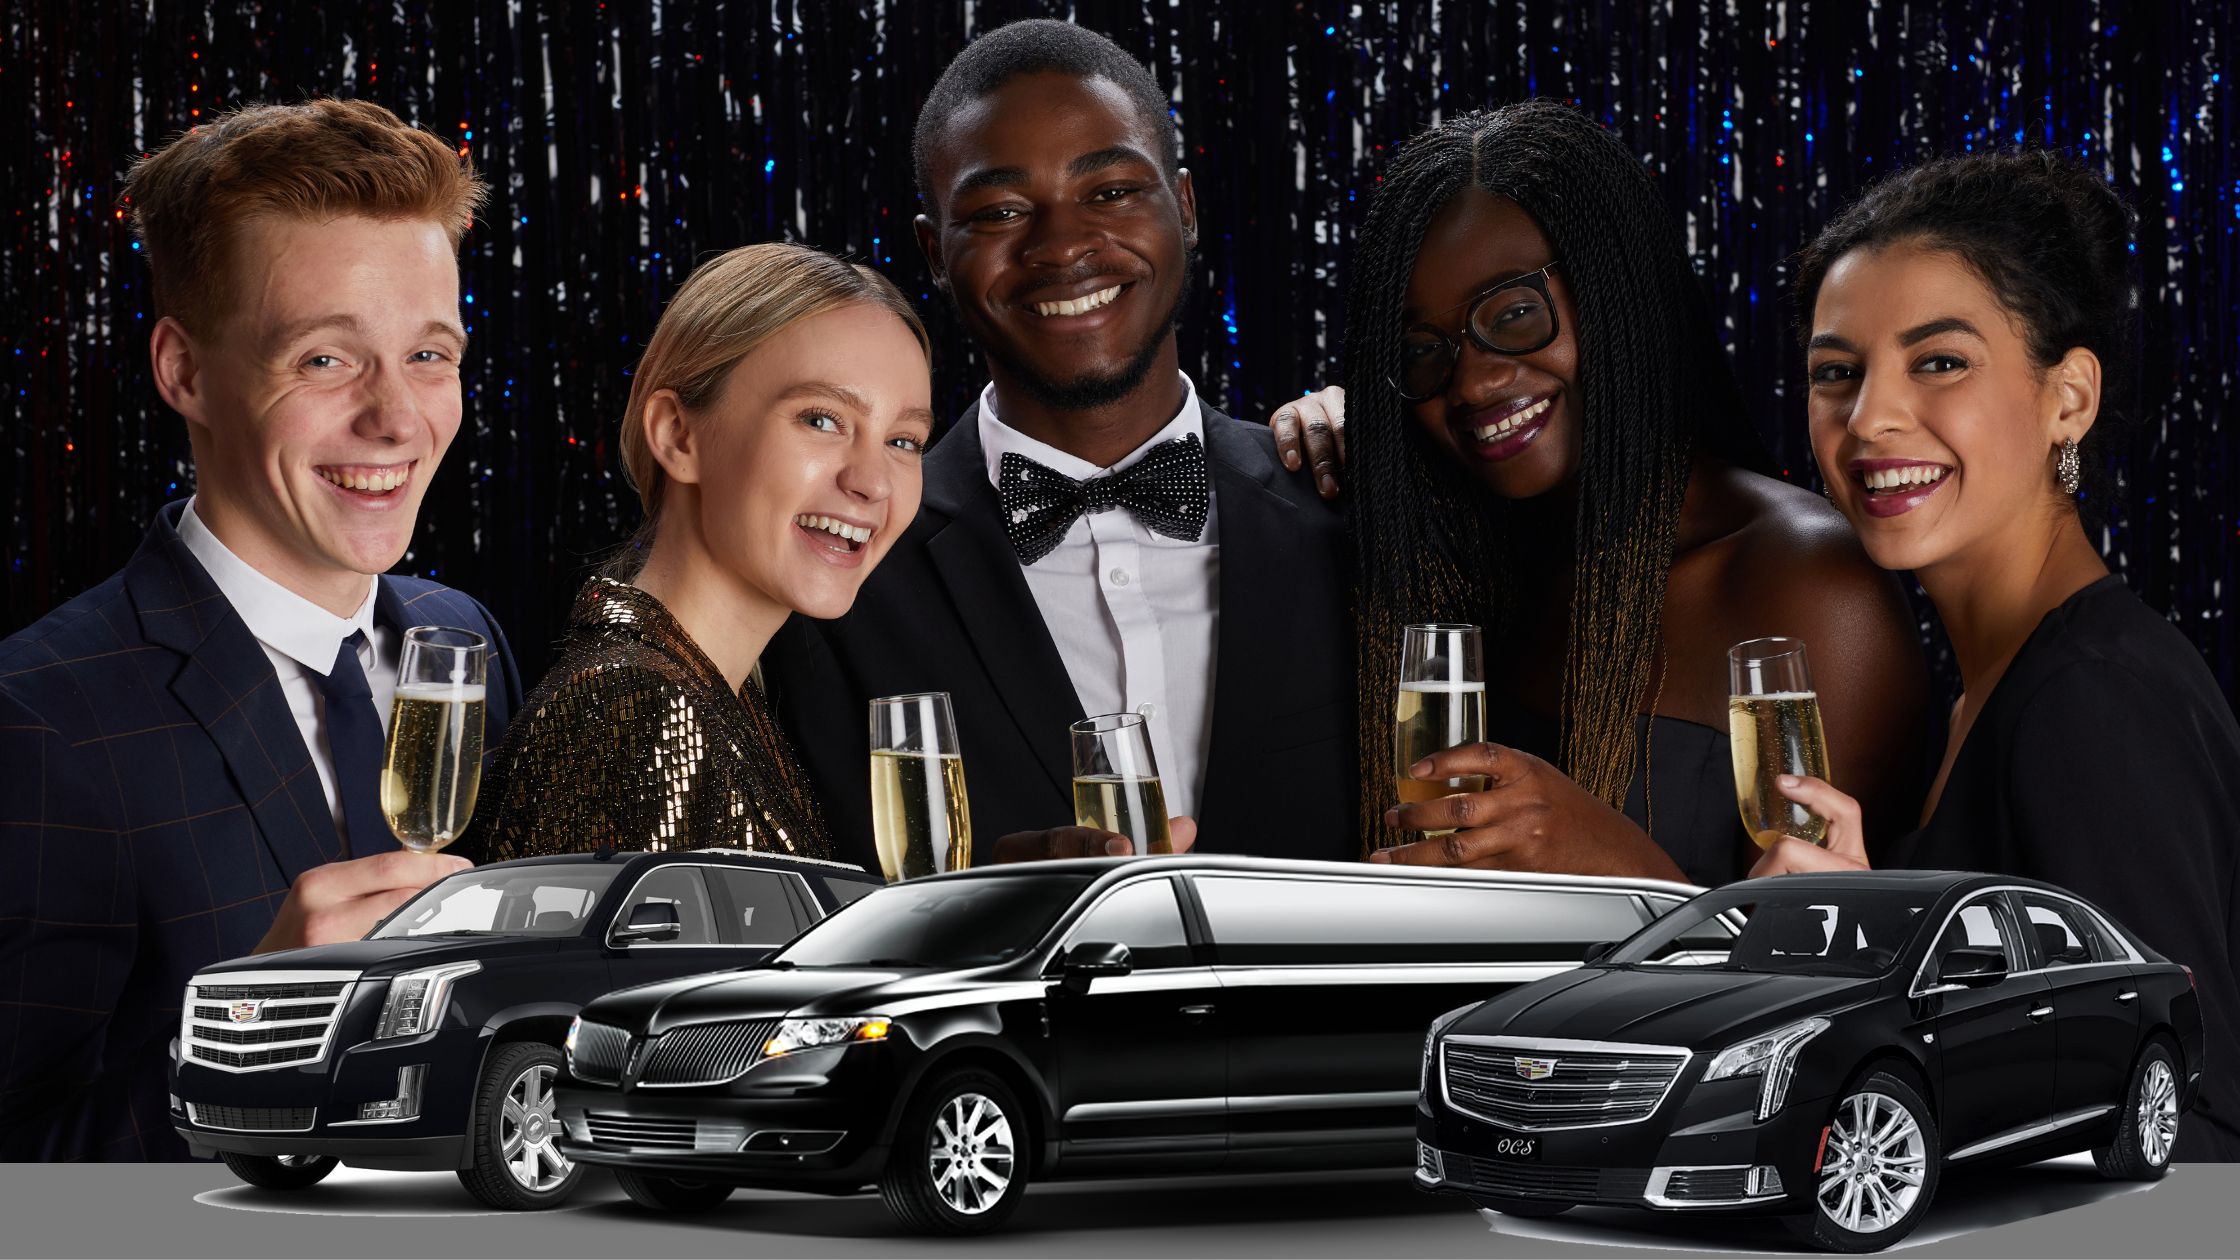 Commack NY’s Premier Prom Limo Service – Secure Your Limo Today